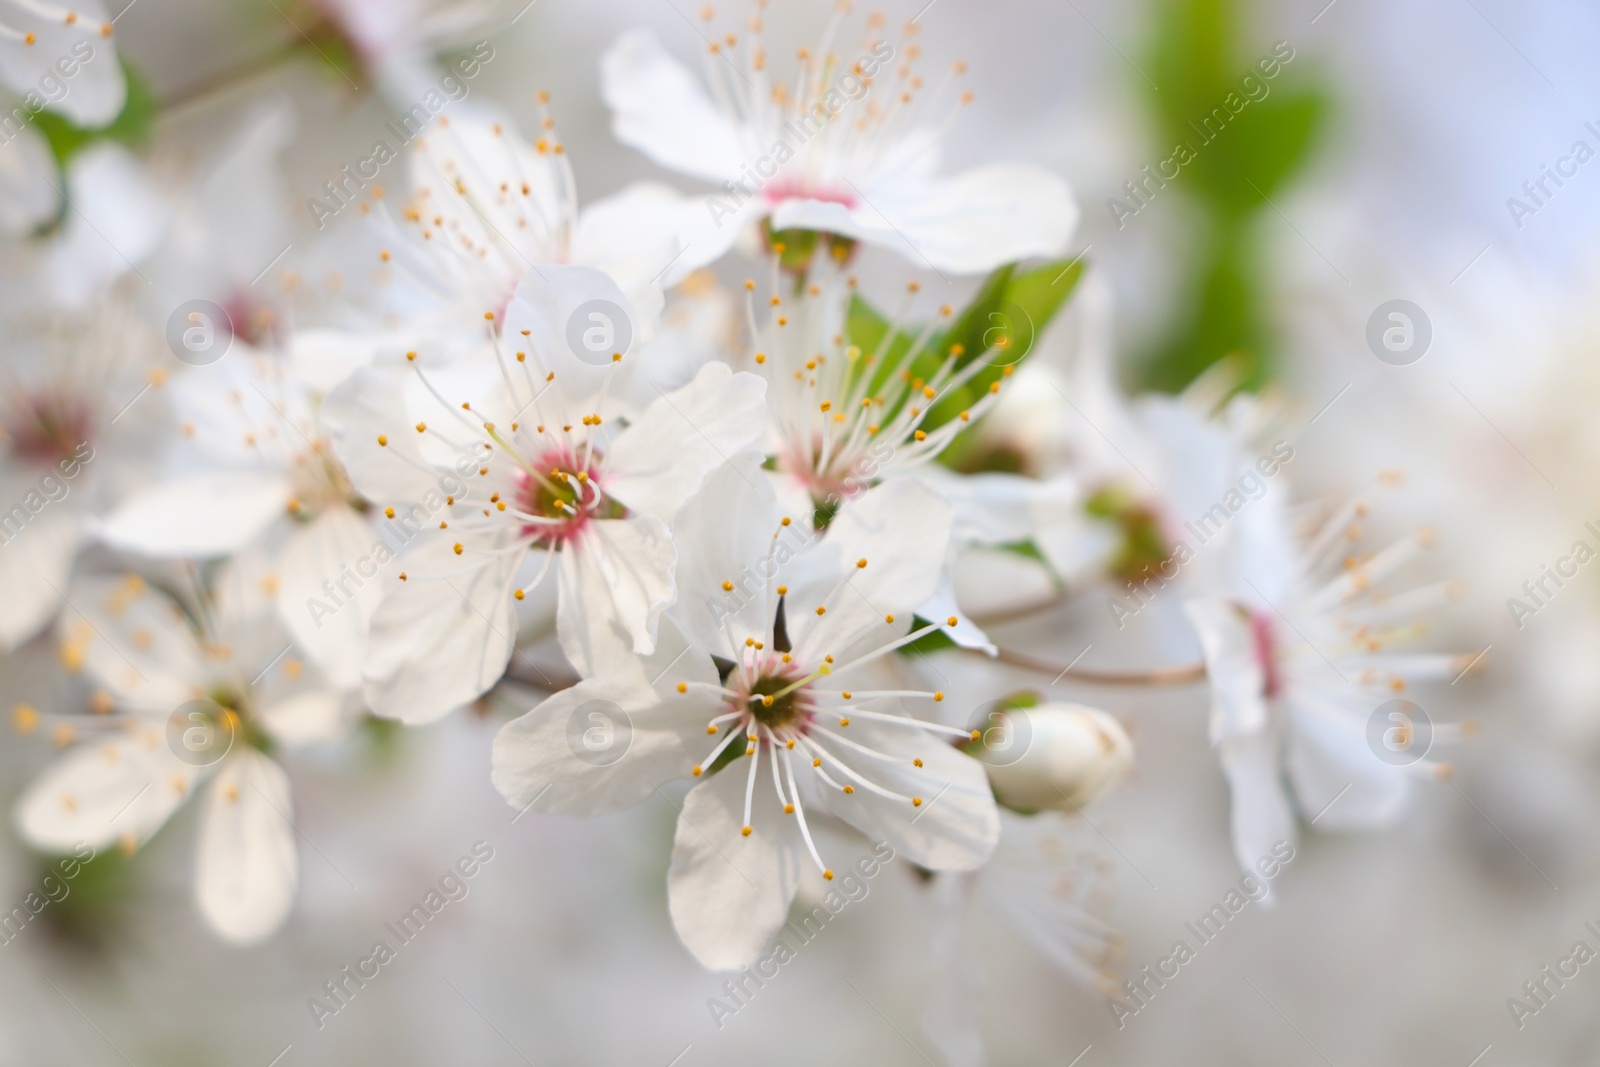 Photo of Cherry tree with white blossoms on blurred background, closeup. Spring season